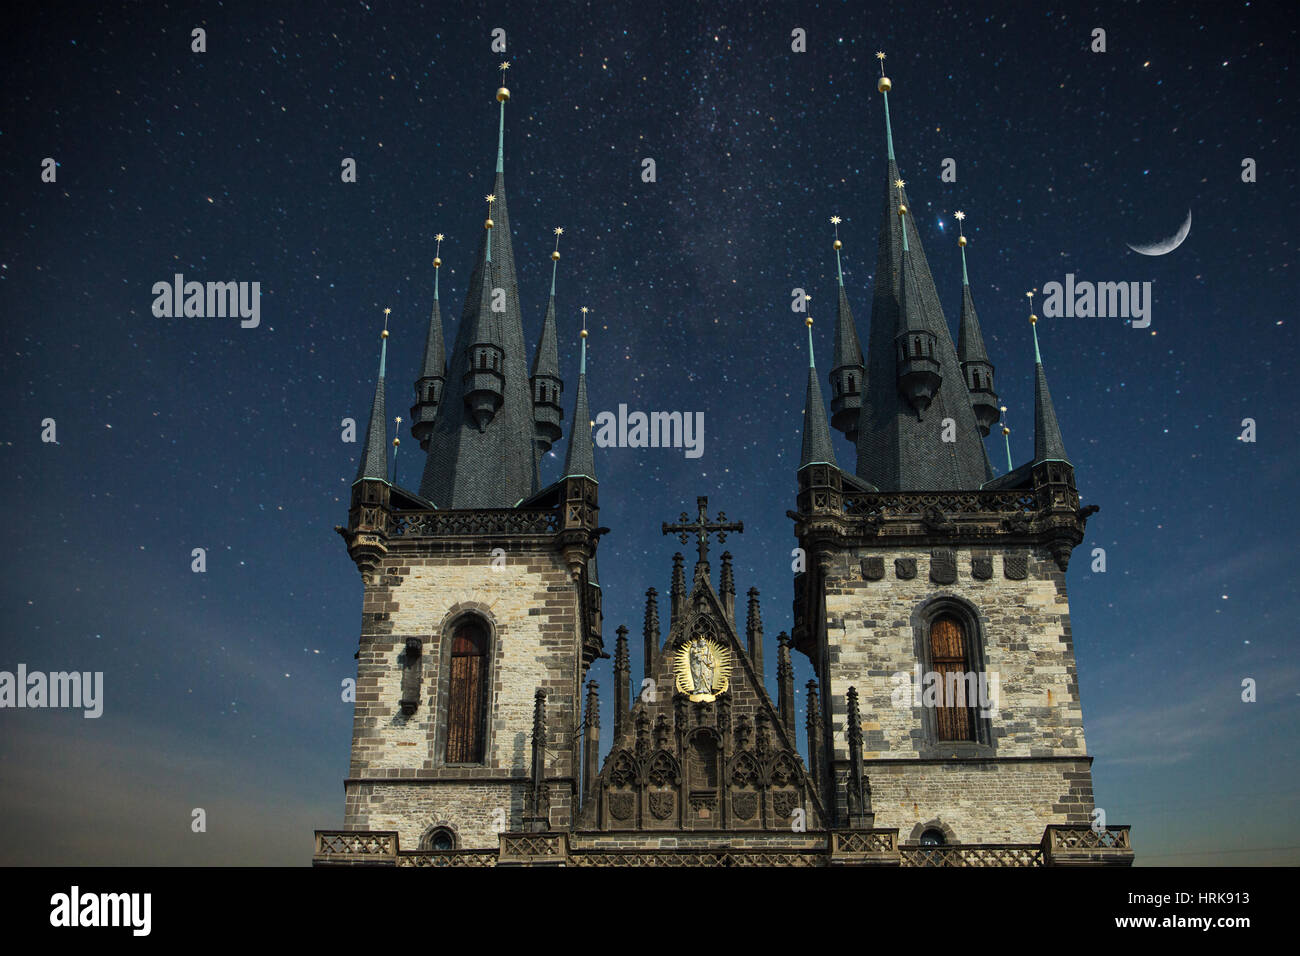 Prague Old town square, Tyn Cathedral. under sunlight. At night the stars shine and the moon. Stock Photo